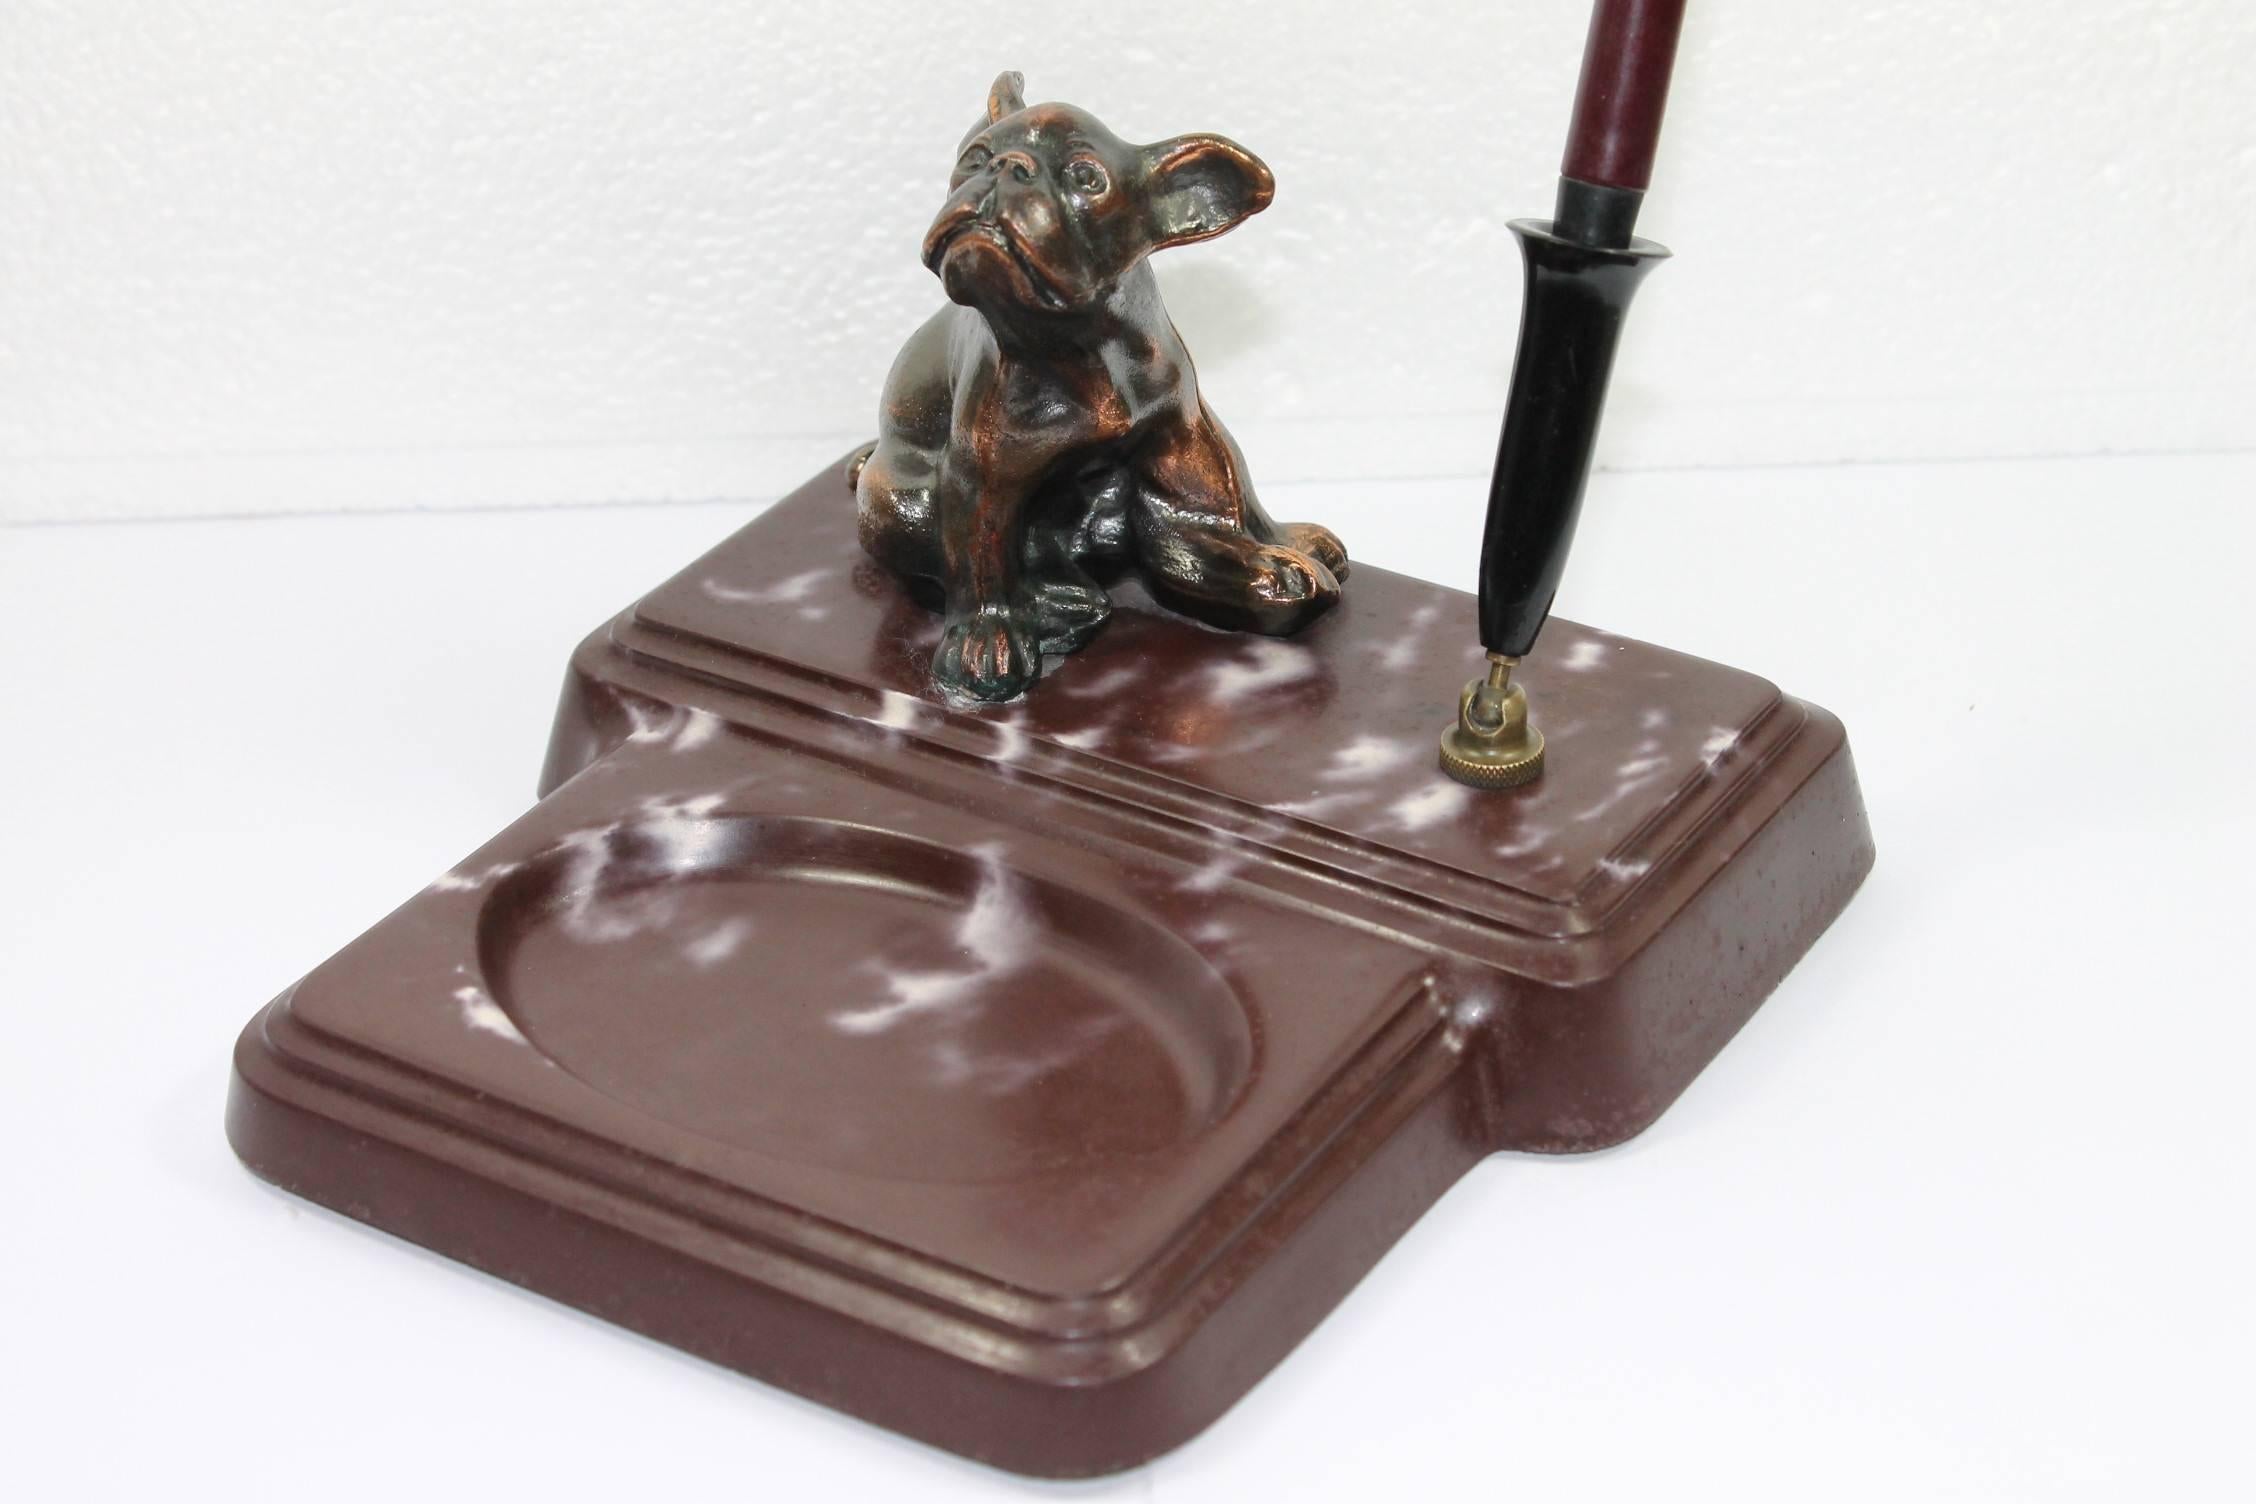 Art Deco desk set - pen holder - paper weight - Desk Accessory with a French bulldog on top. 
This Animal Themed Pen Holder has a brown and white Marble Base with a bronze bulldog dog on top and a movable pen holder with a fountain pen. The pen